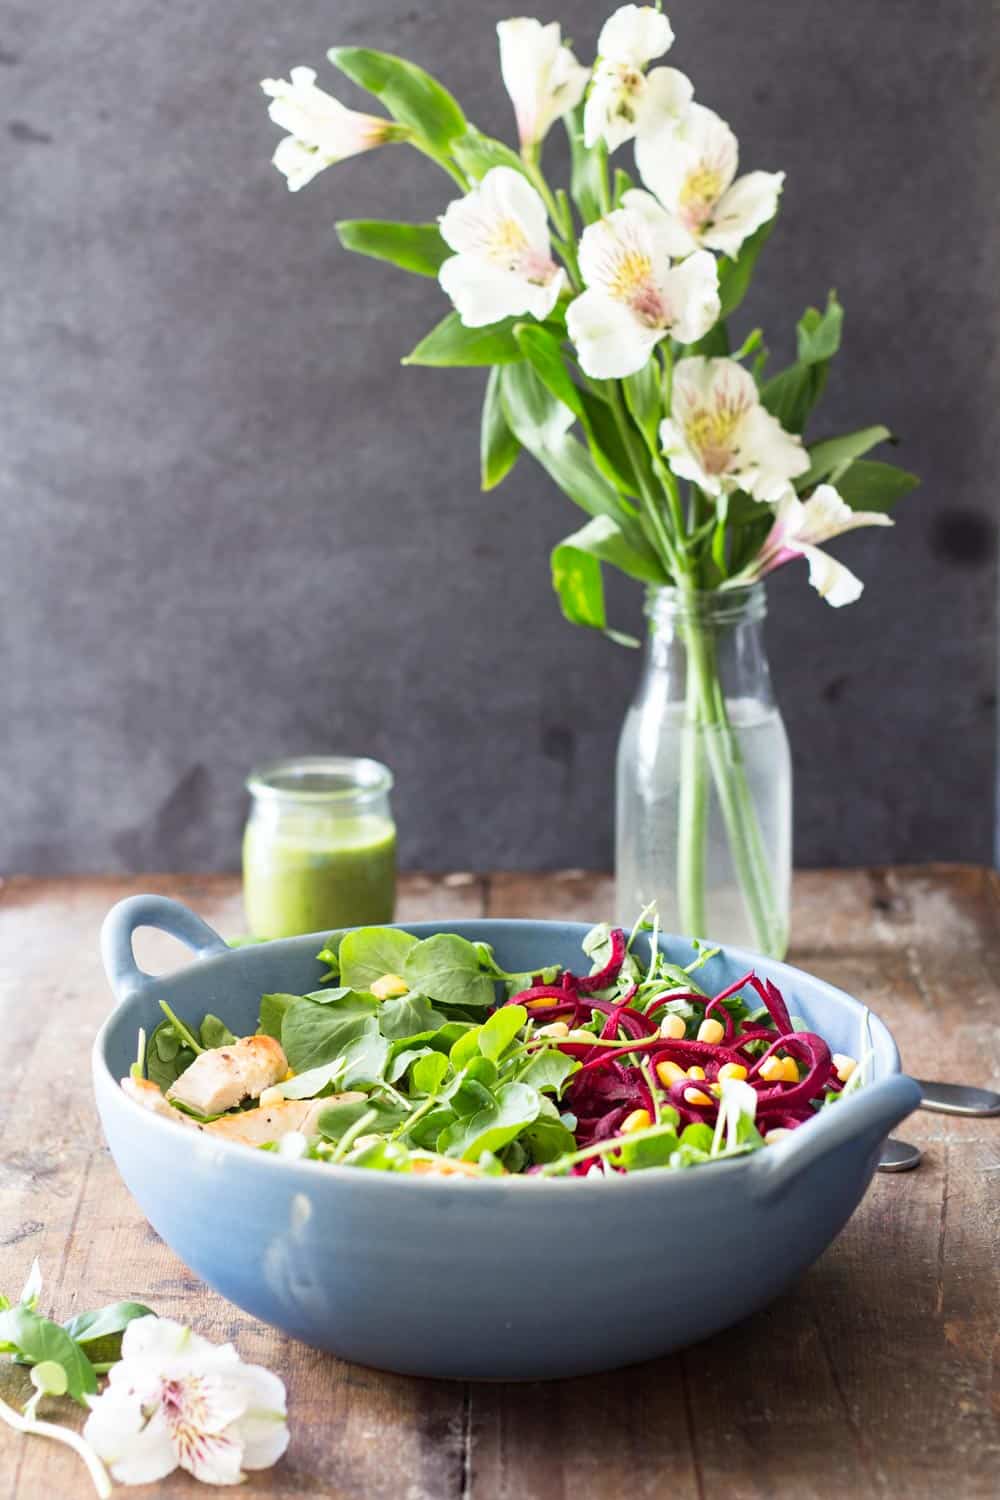 Watercress Salad with Basil Clementine Dressing in a blue bowl, and a vase with flowers.